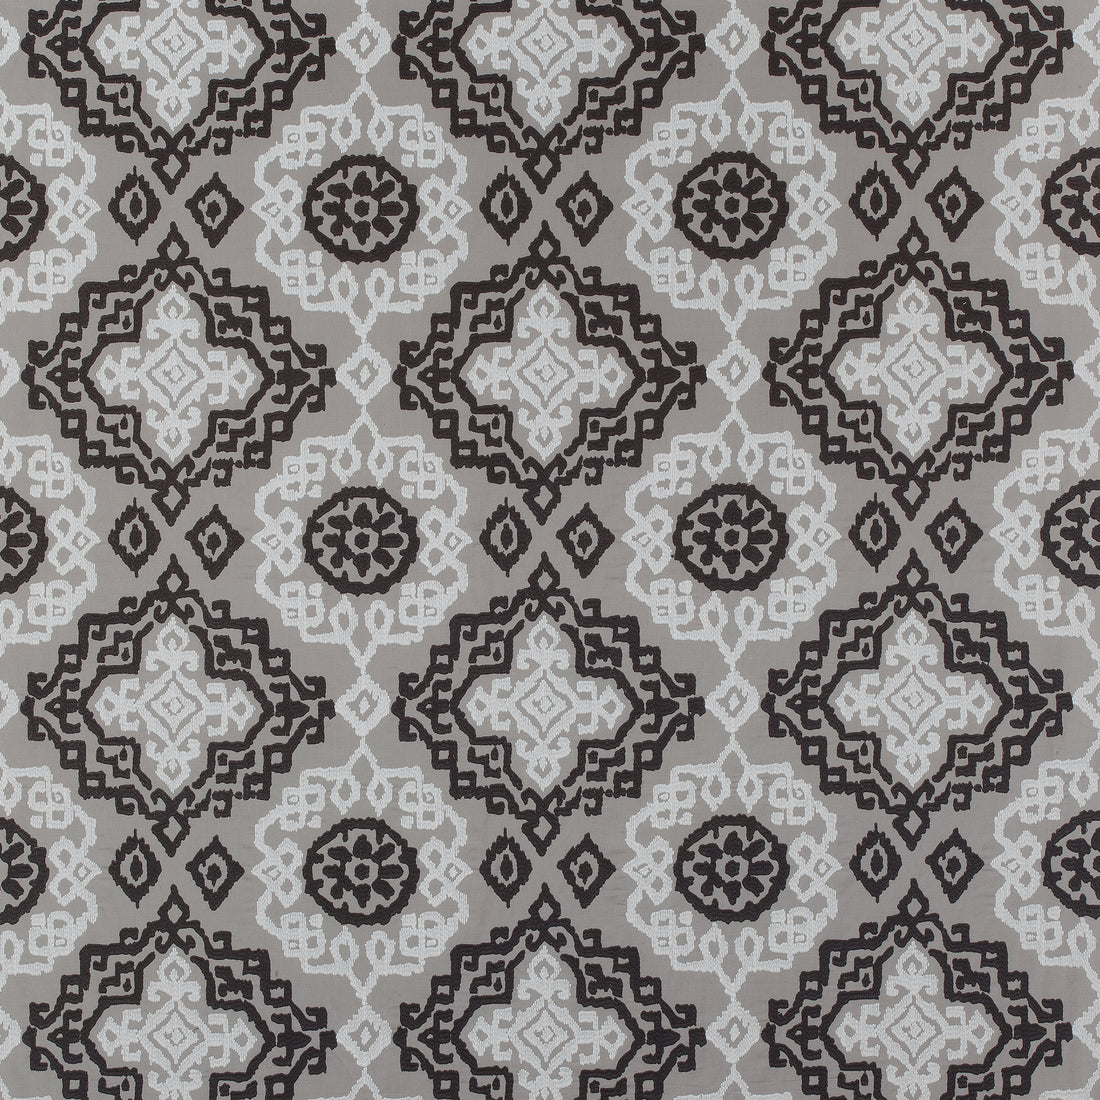 Scottsdale Embroidery fabric in grey and black color - pattern number AW73018 - by Anna French in the Meridian collection